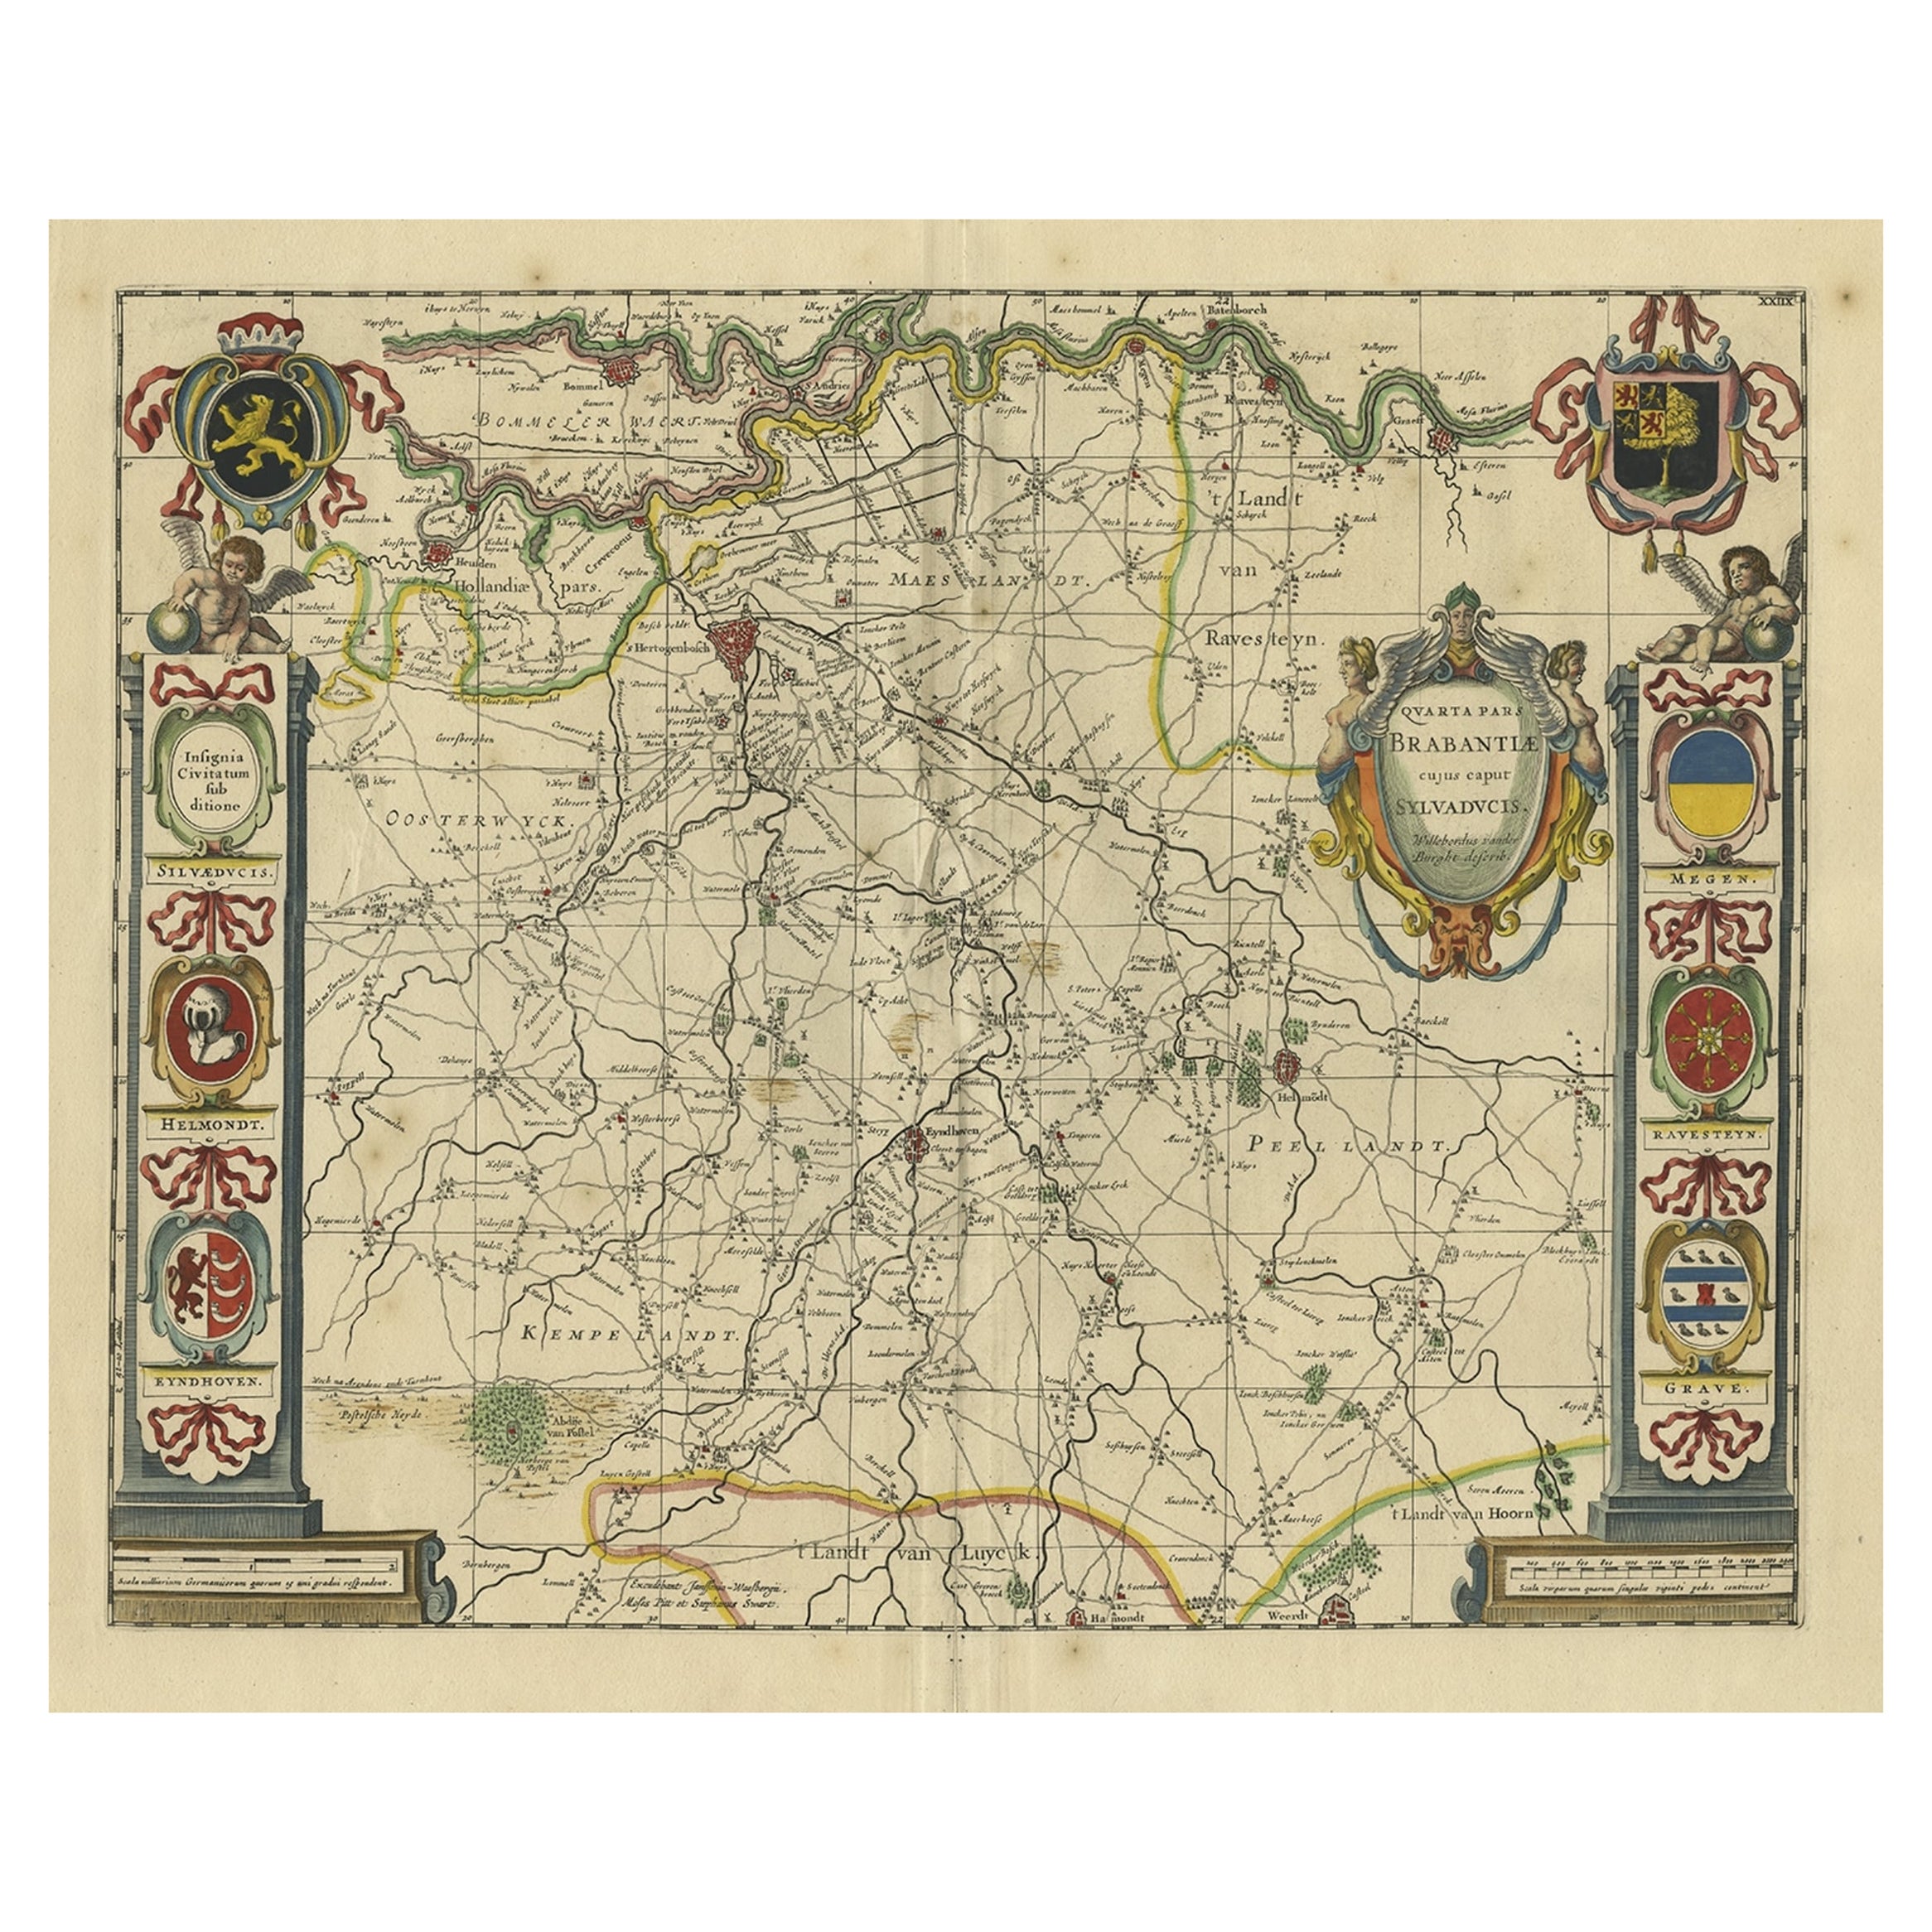 Decorative Antique Map of the Dutch Province of Noord-Brabant, ca.1640